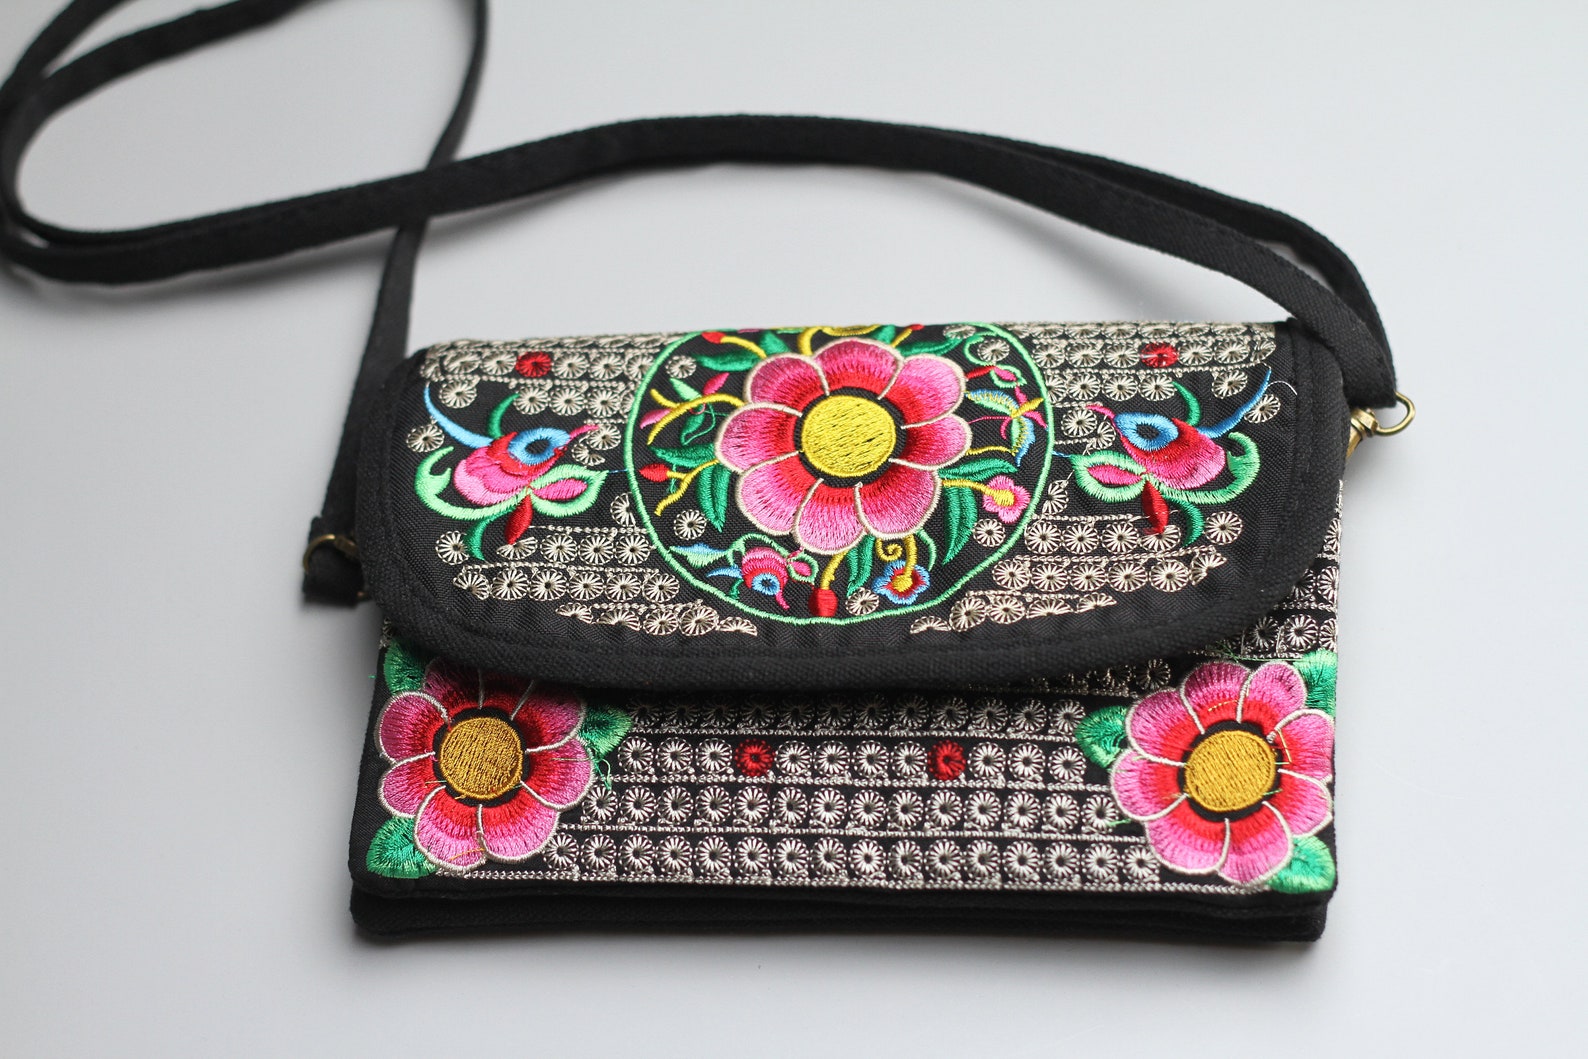 Traditional Floral Embroidered Mexican Wallet Purse Artisanal - Etsy